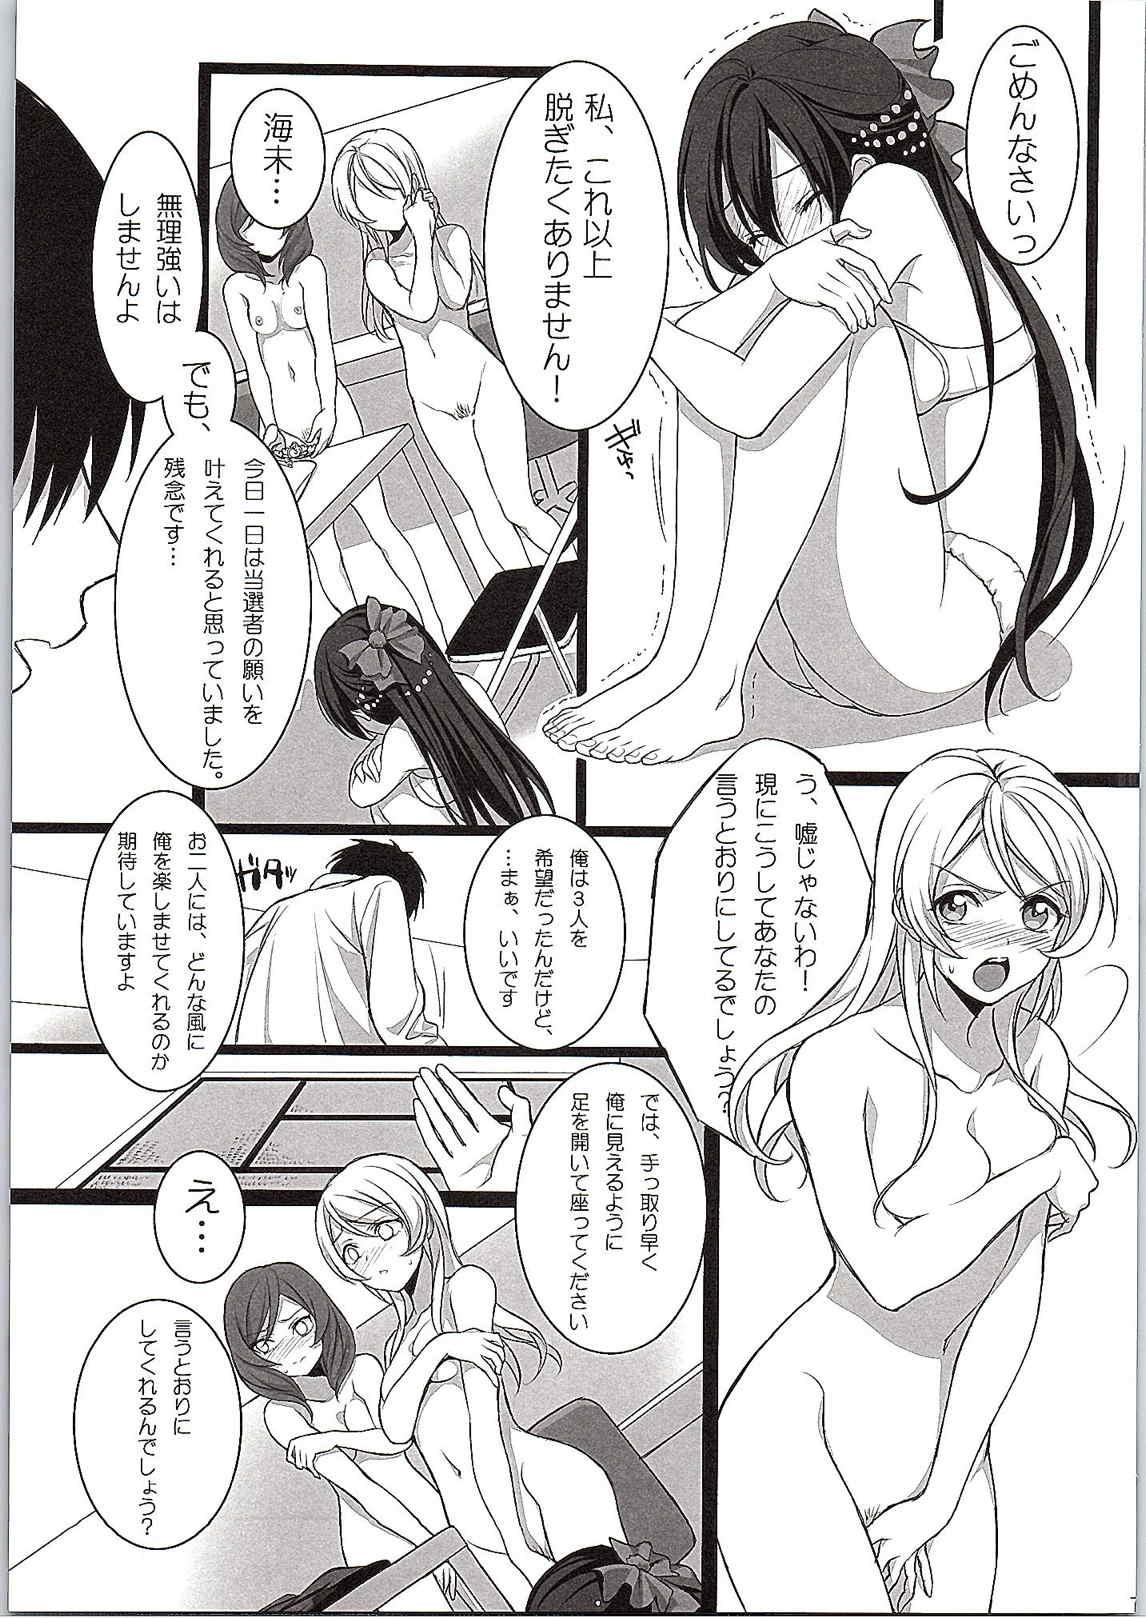 Creampies Target - Love live Chat - Page 6